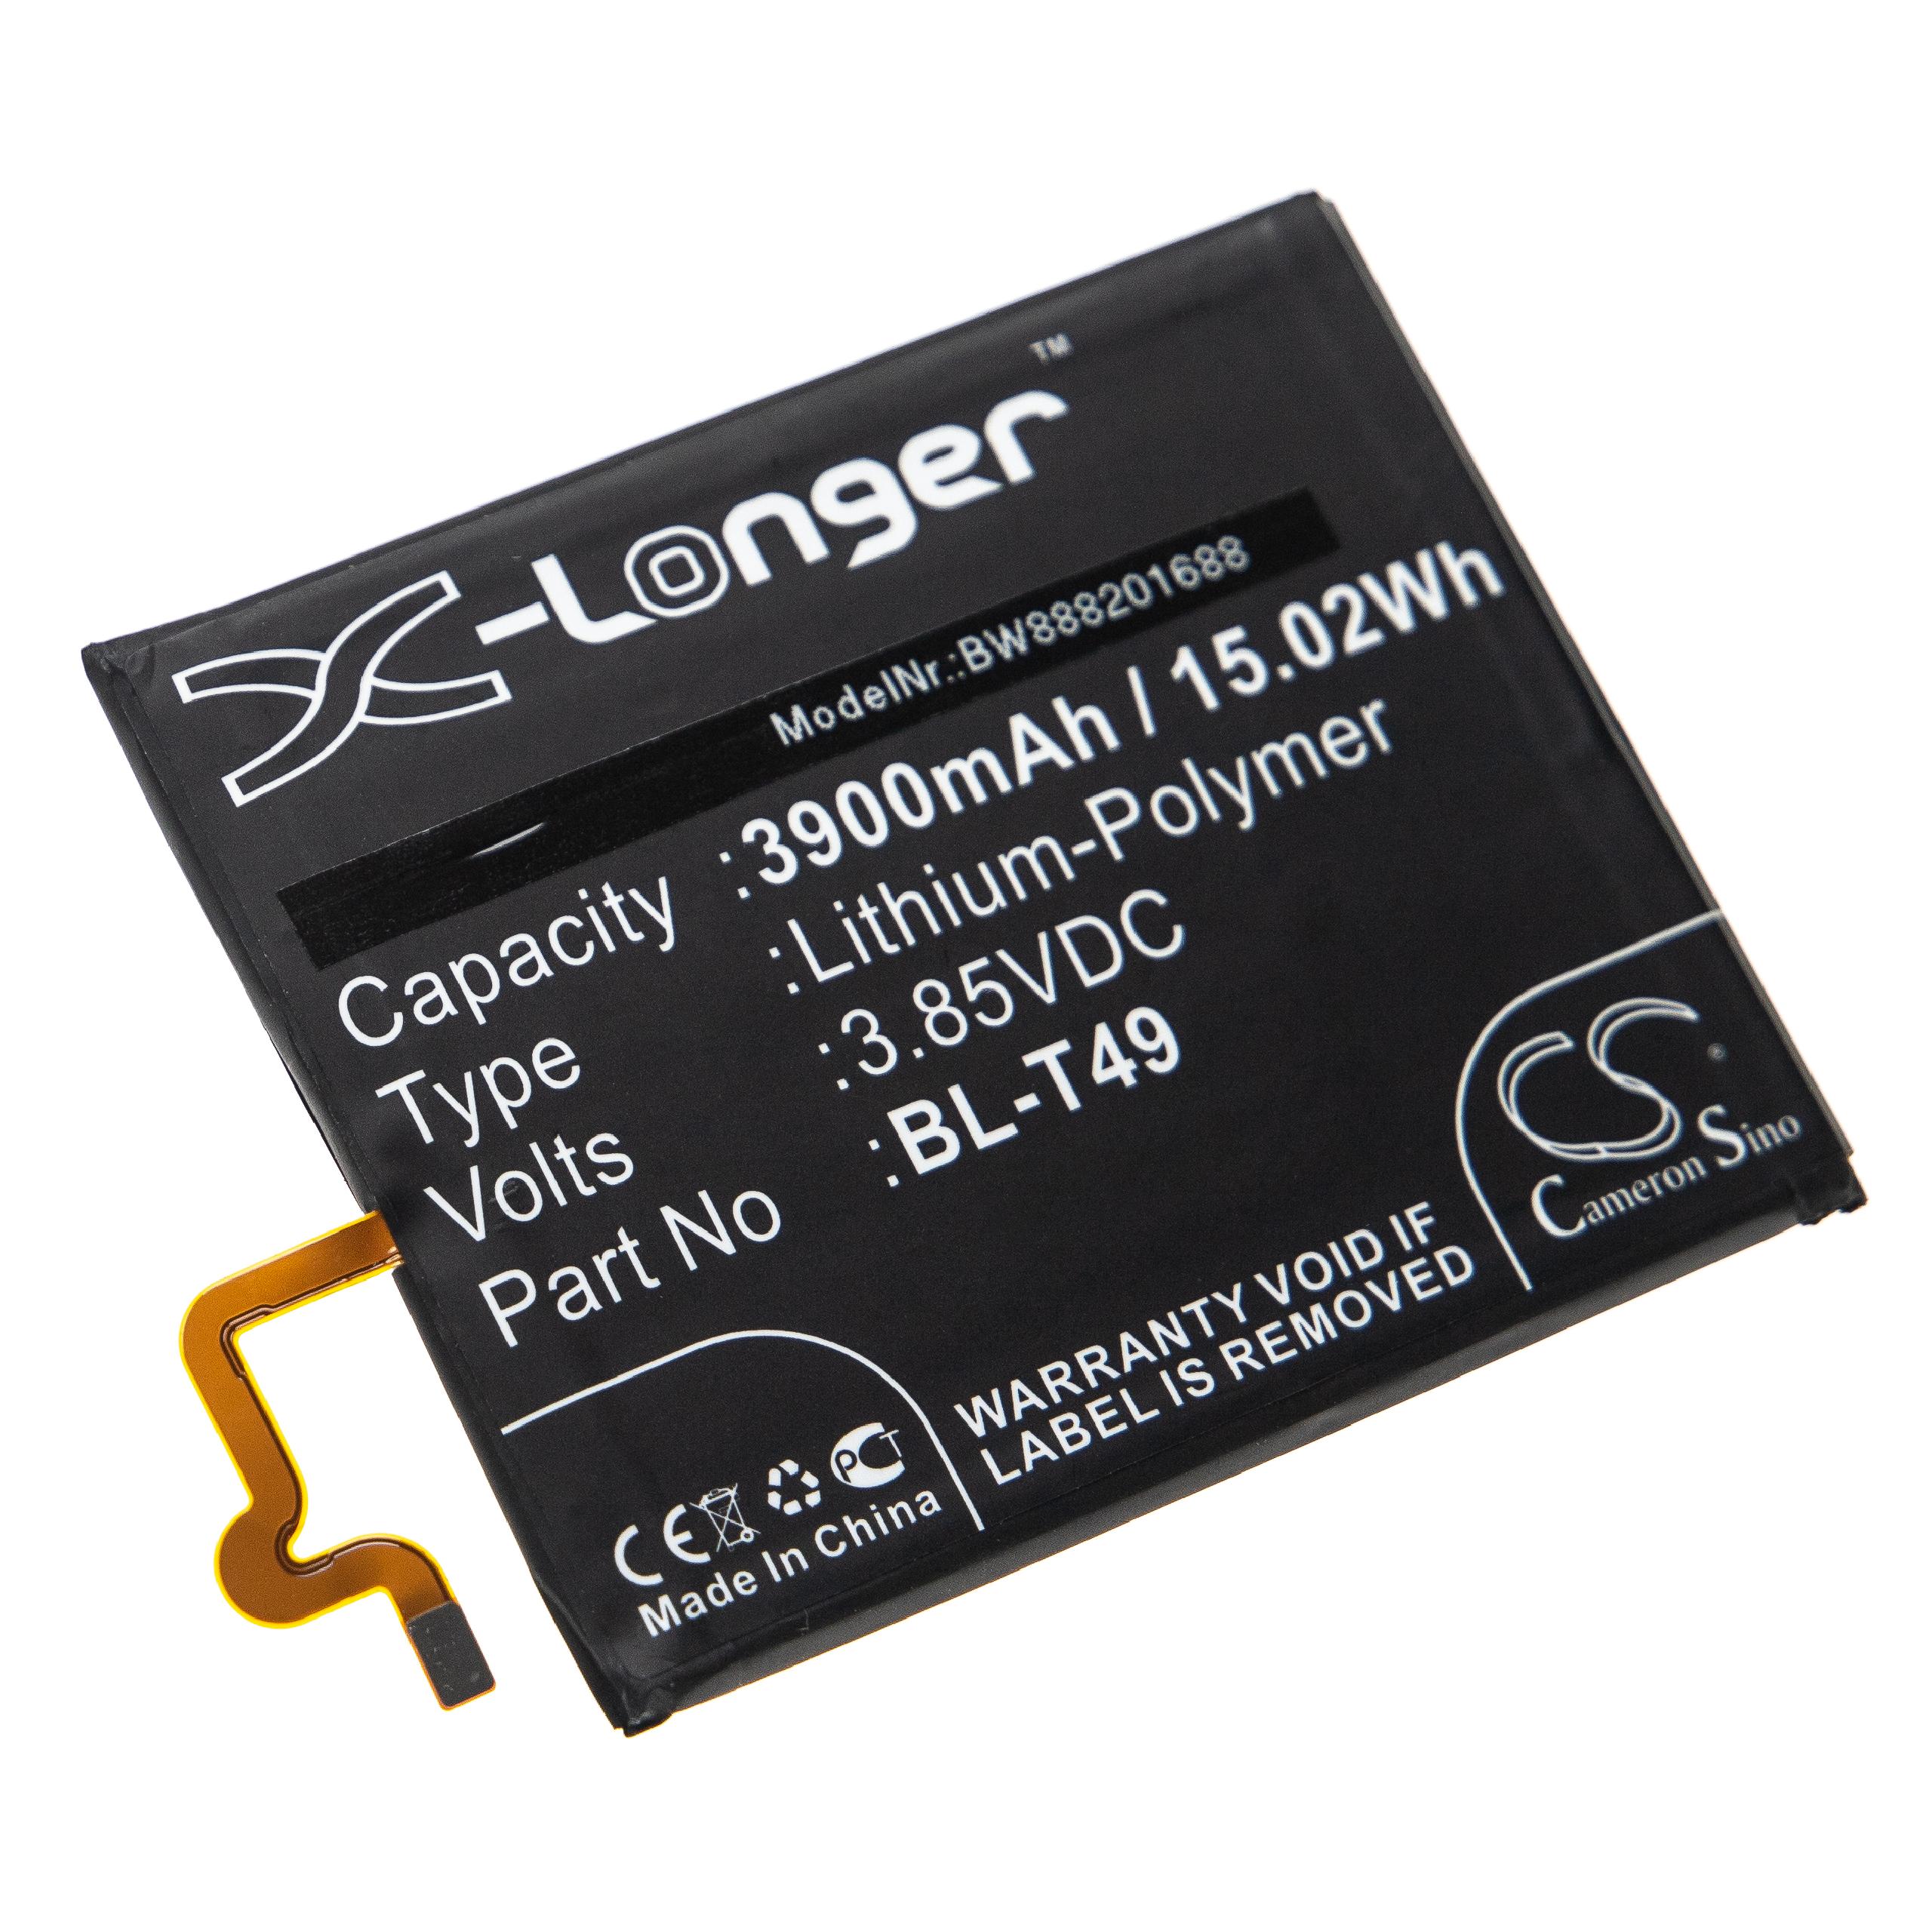 Mobile Phone Battery Replacement for LG BL-T49 - 3900mAh 3.85V Li-polymer